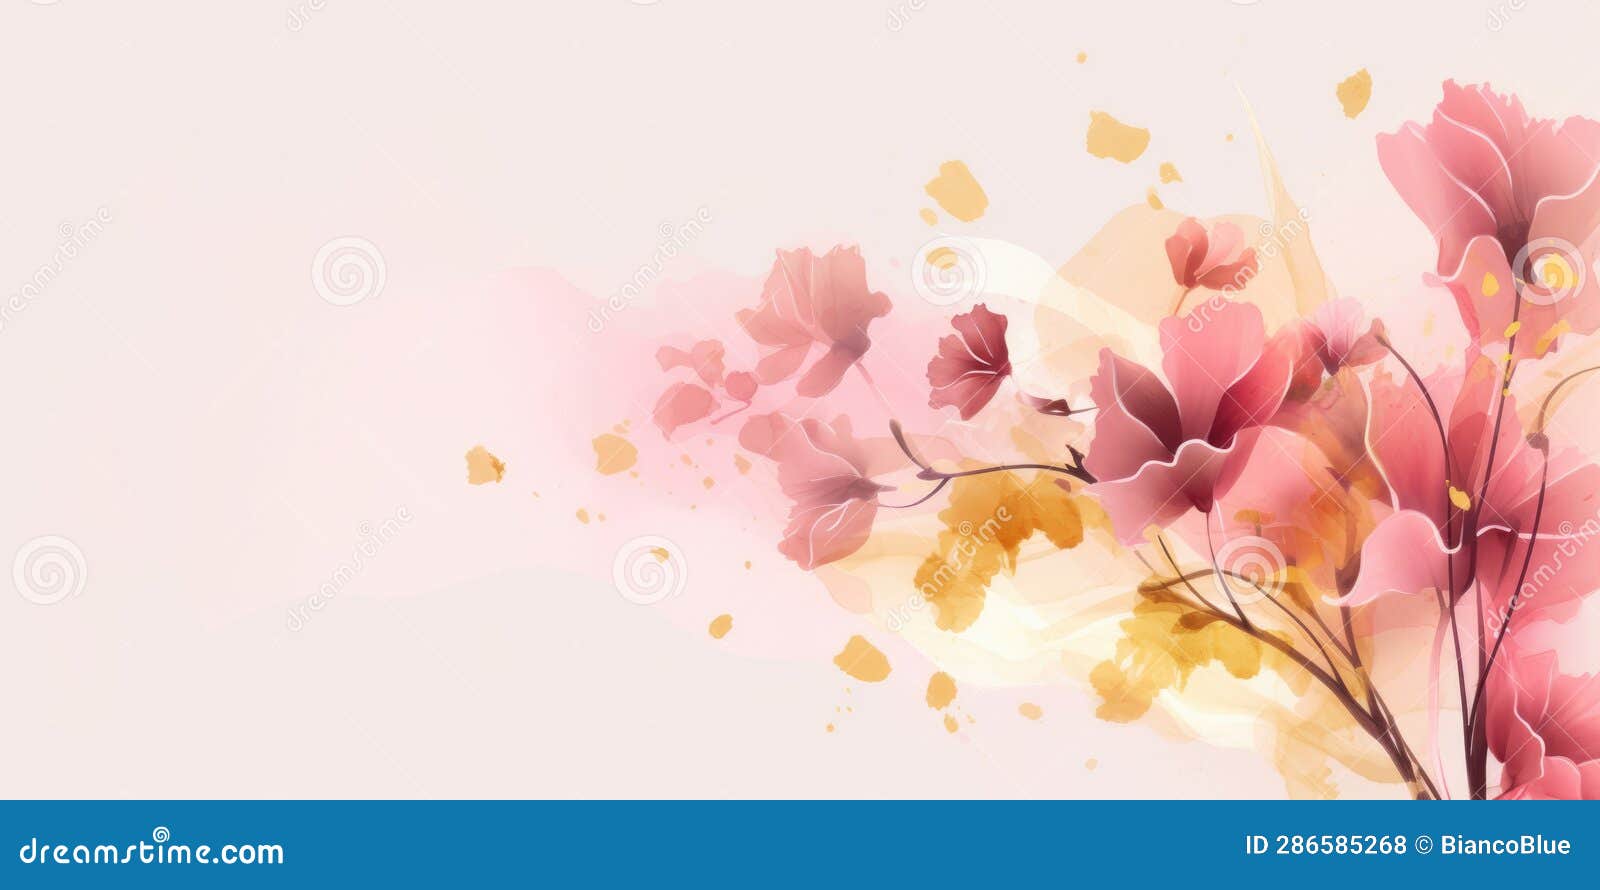 Beautiful Abstract Gold and Pink Watercolor Floral Design Background ...